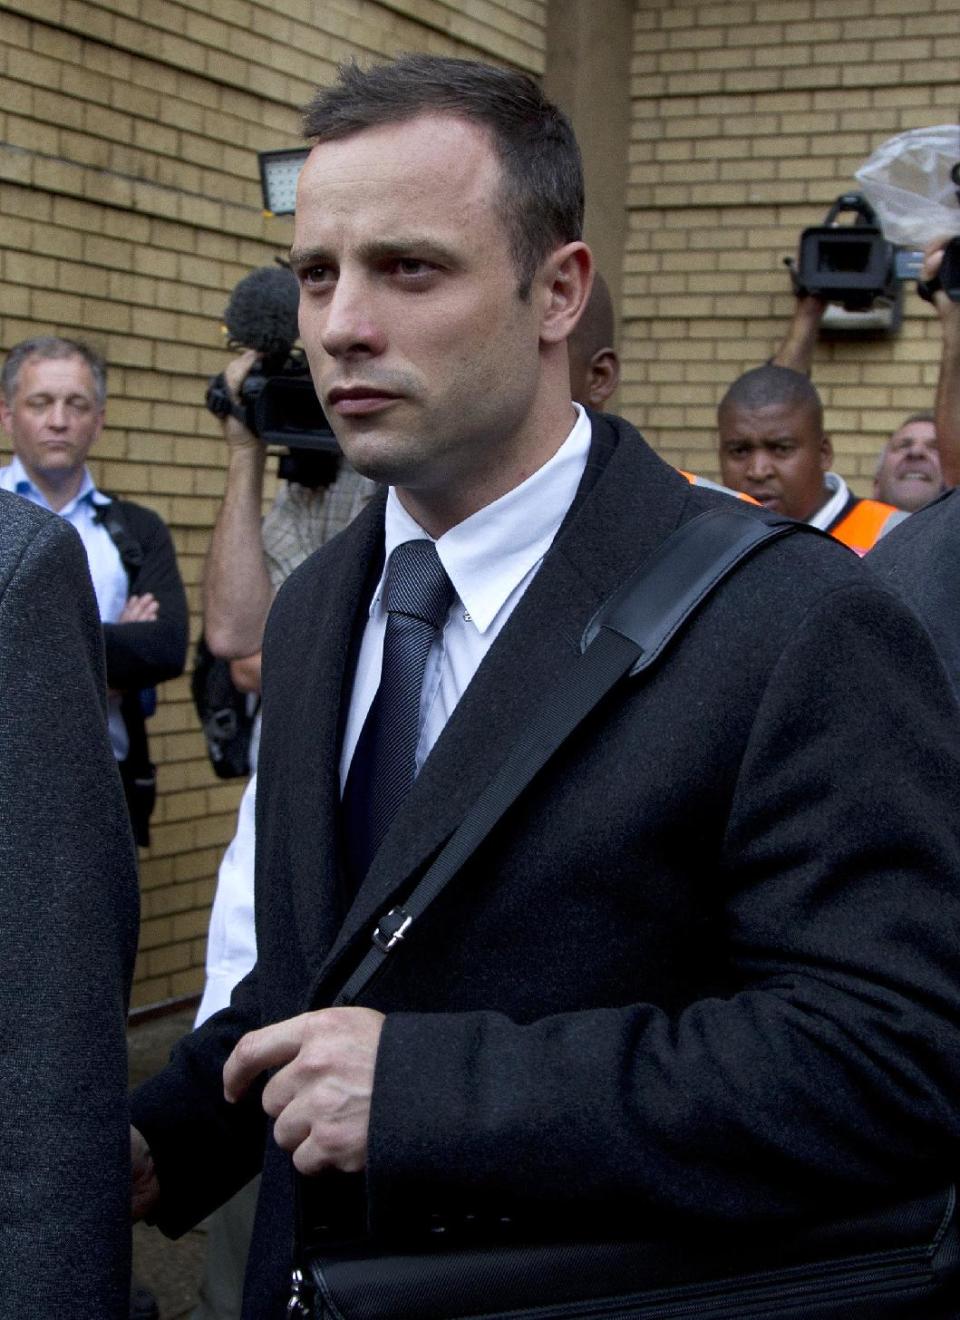 Oscar Pistorius, leaves the high court in Pretoria, South Africa, Tuesday, March 11, 2014. Pistorius is charged with murder for the shooting death of his girlfriend, Reeva Steenkamp, on Valentines Day in 2013. (AP Photo/Themba Hadebe)